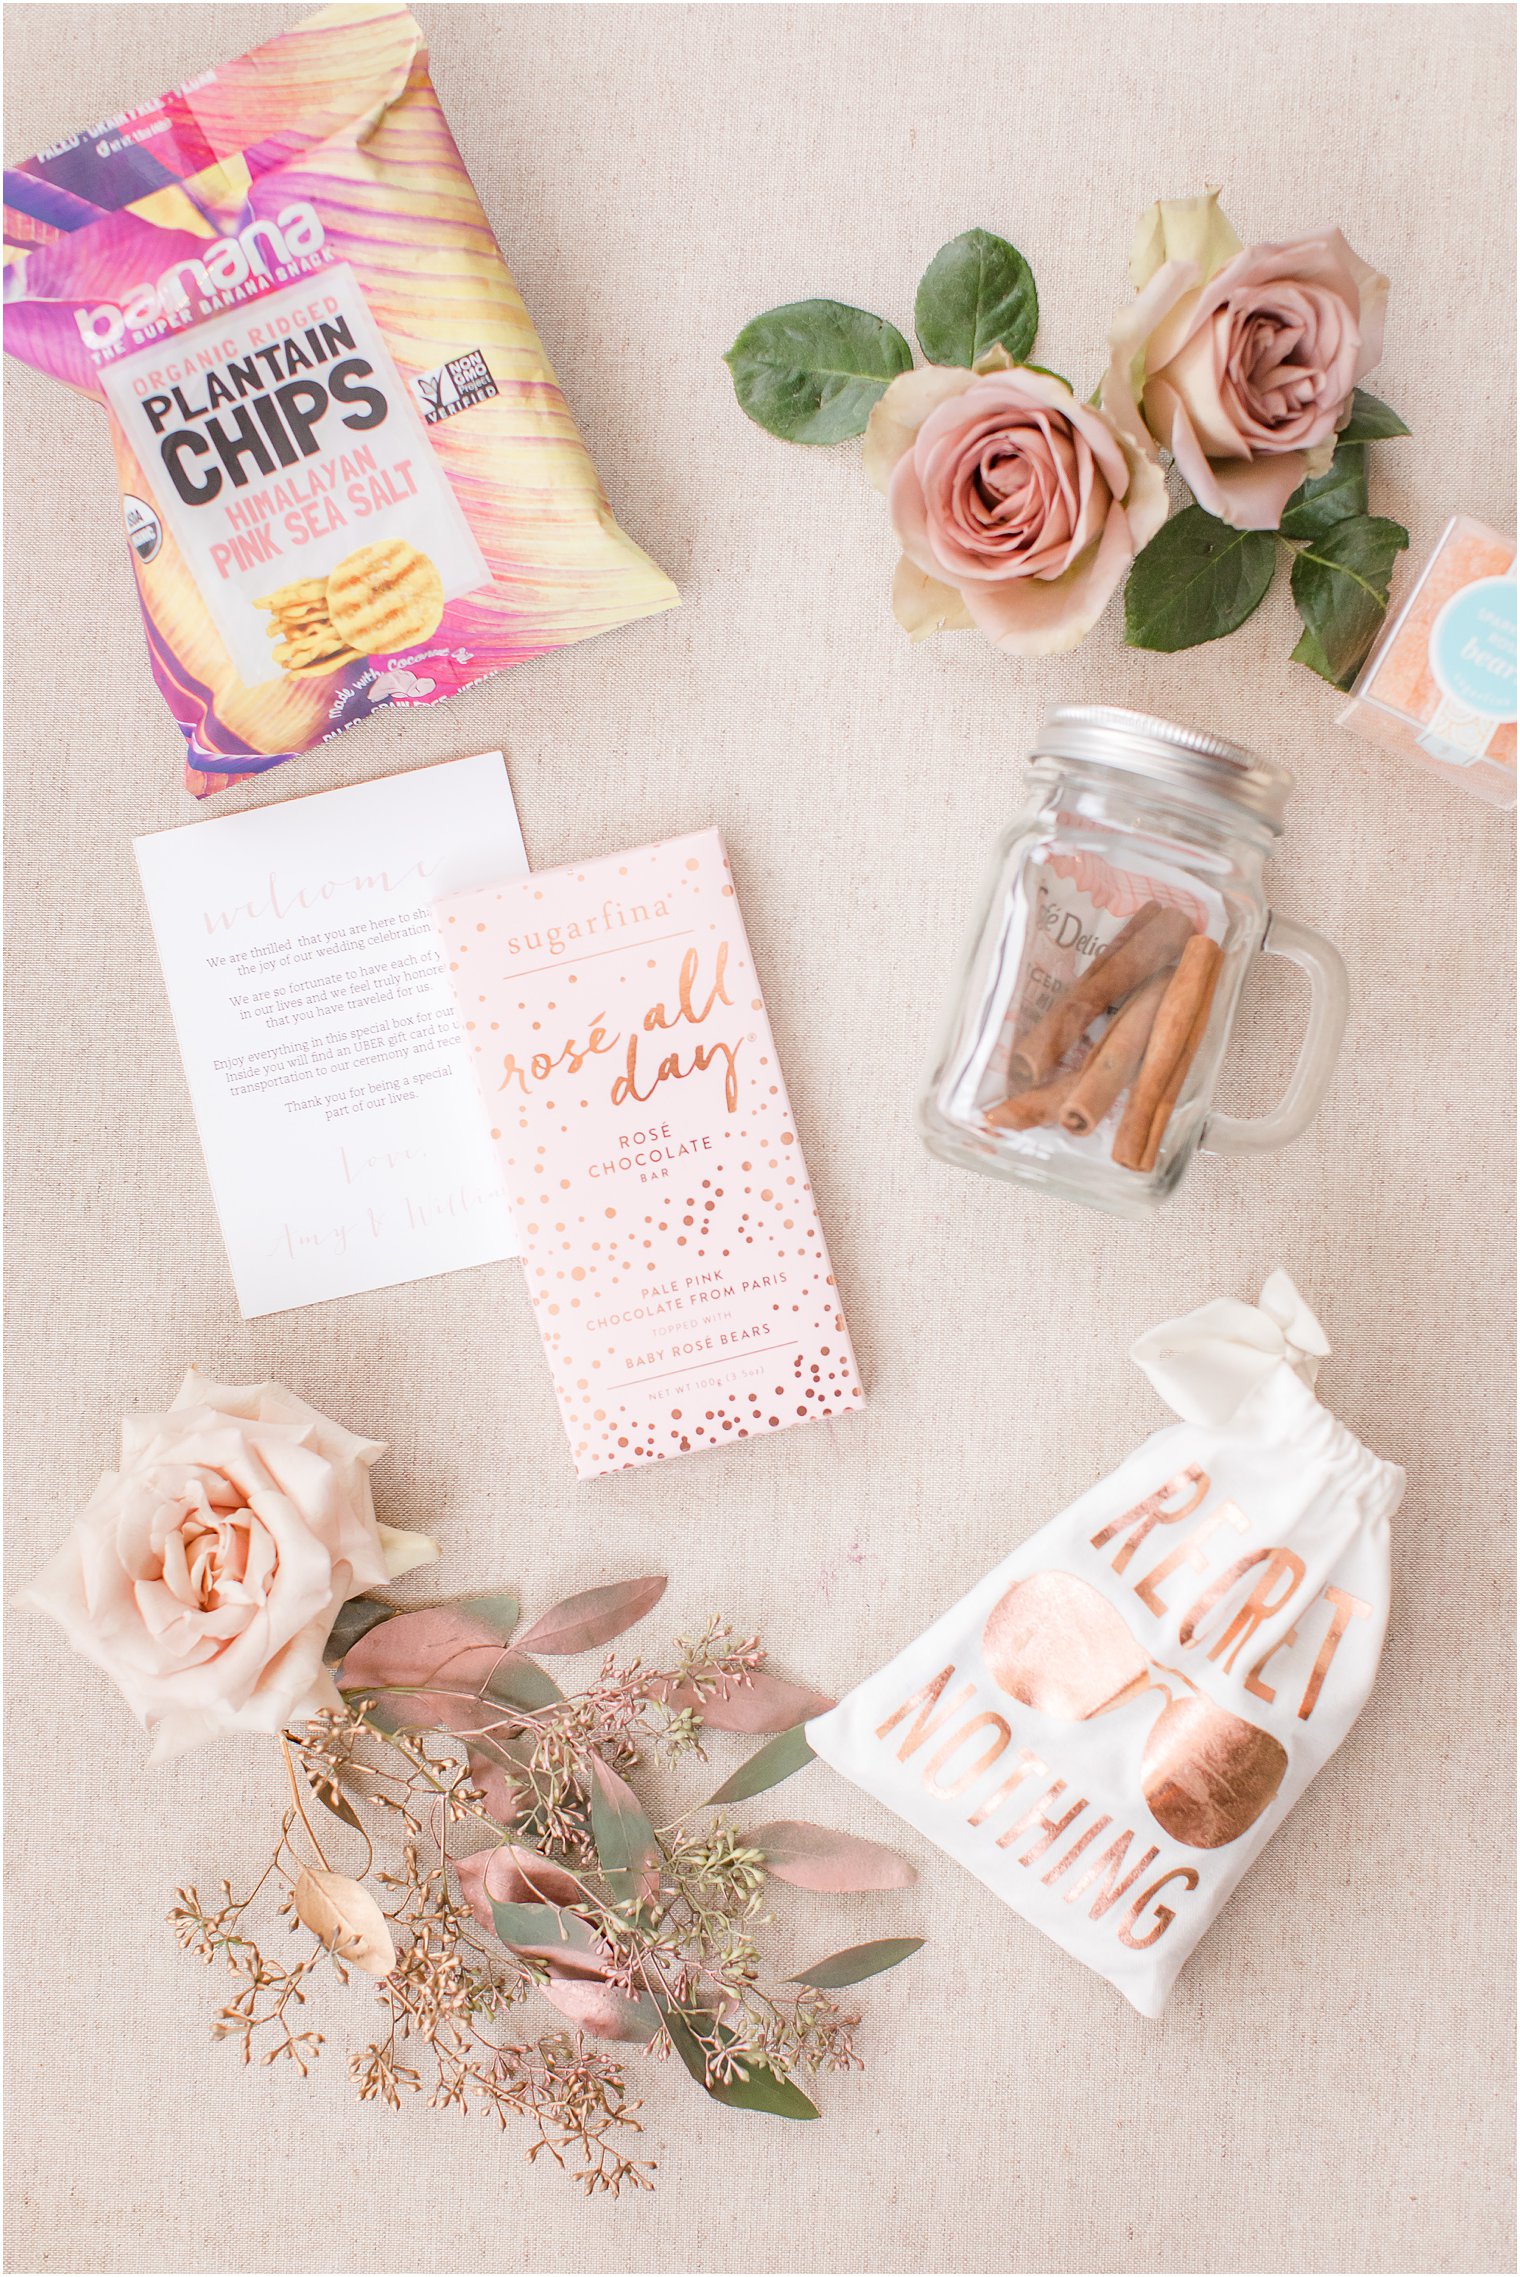 Cute Wedding Welcome Bag Ideas from